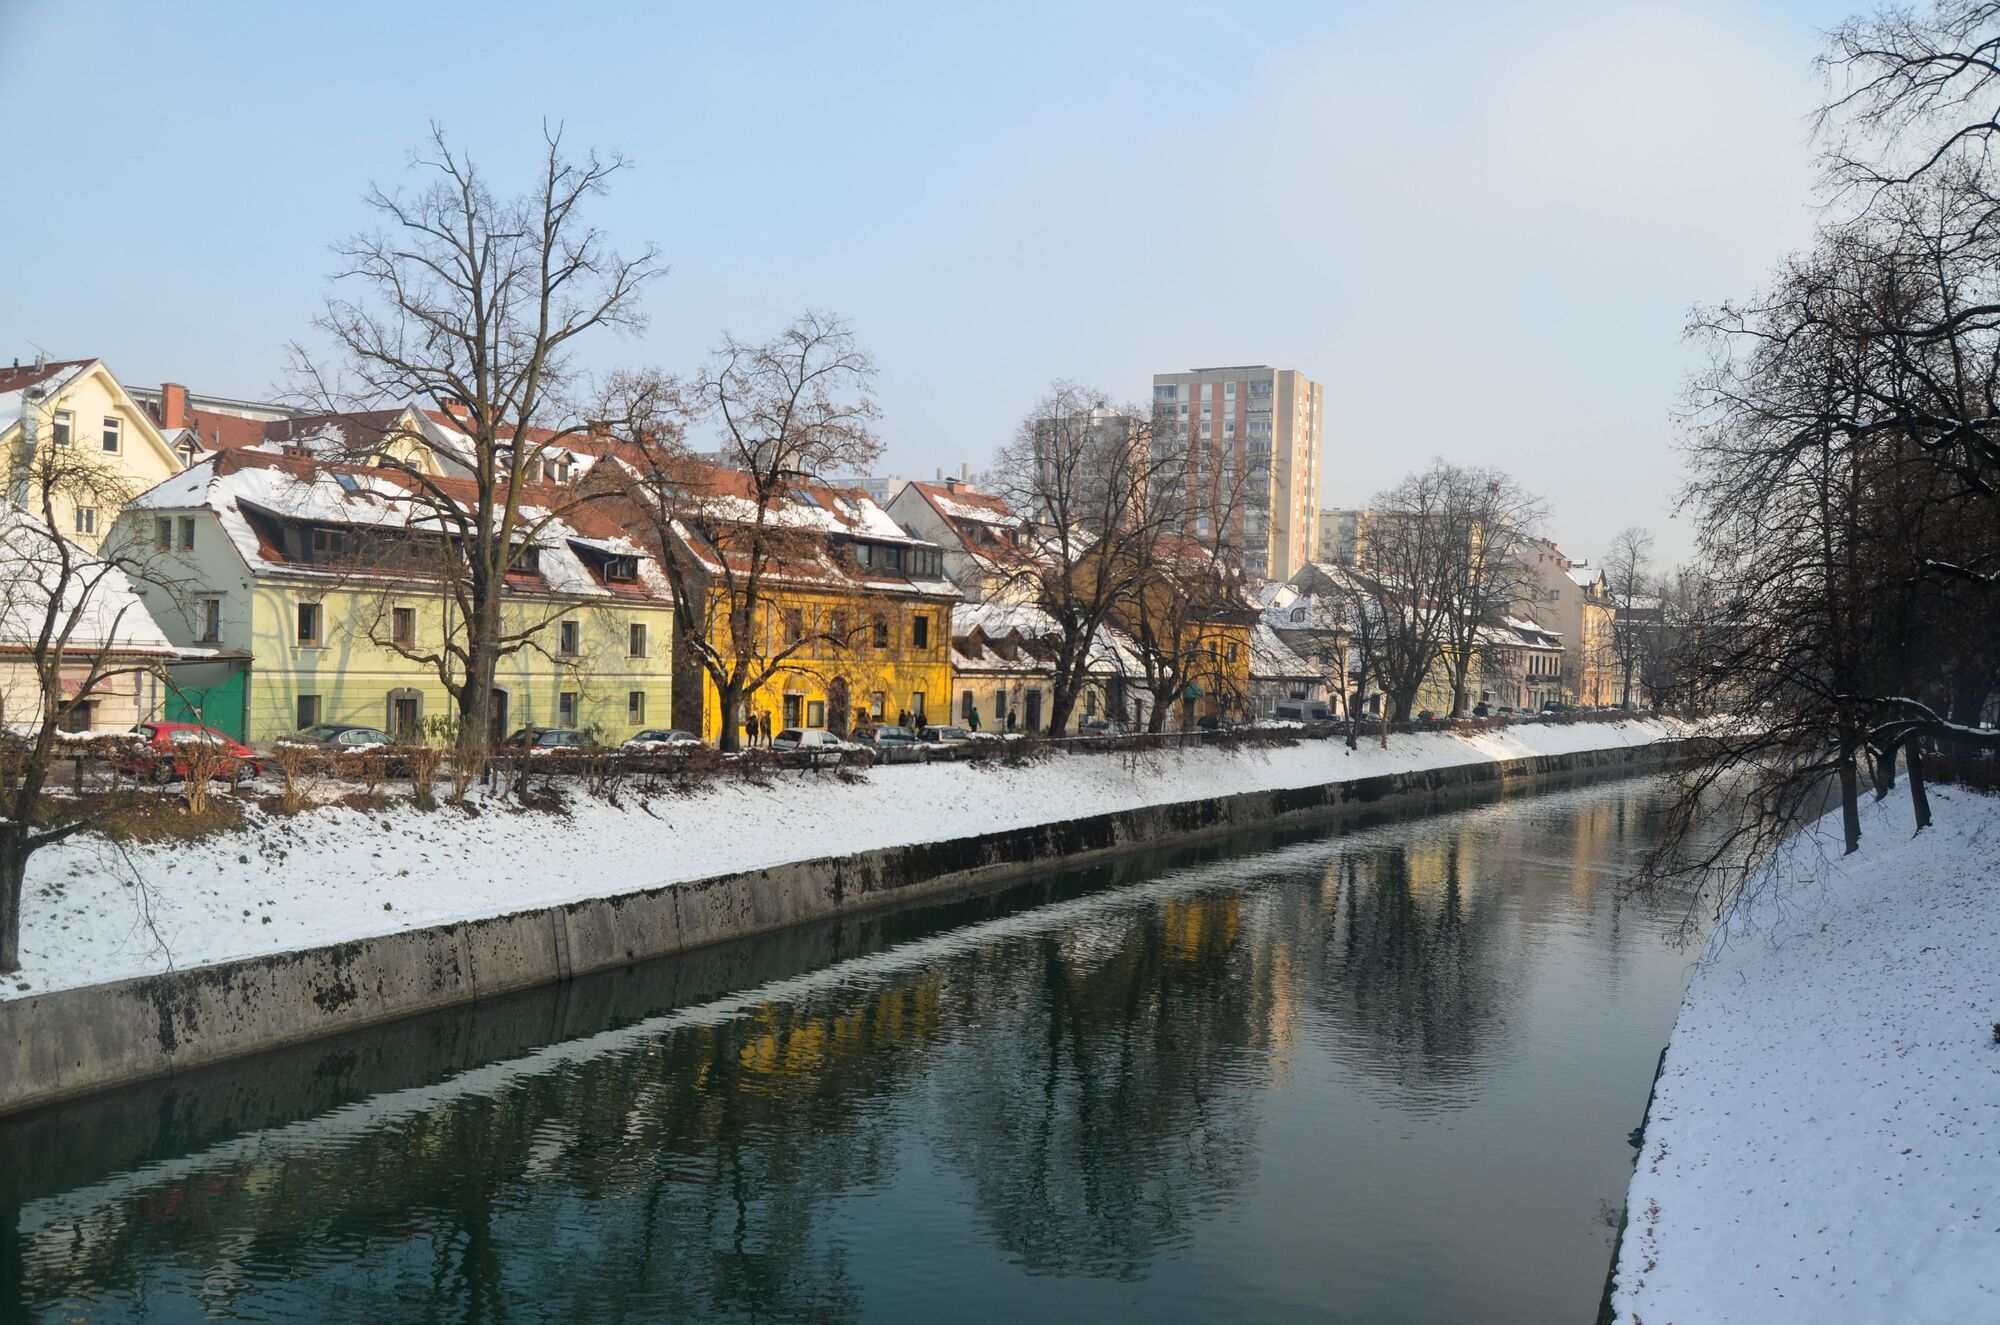 Slovakia and Slovenia: two different countries worth visiting